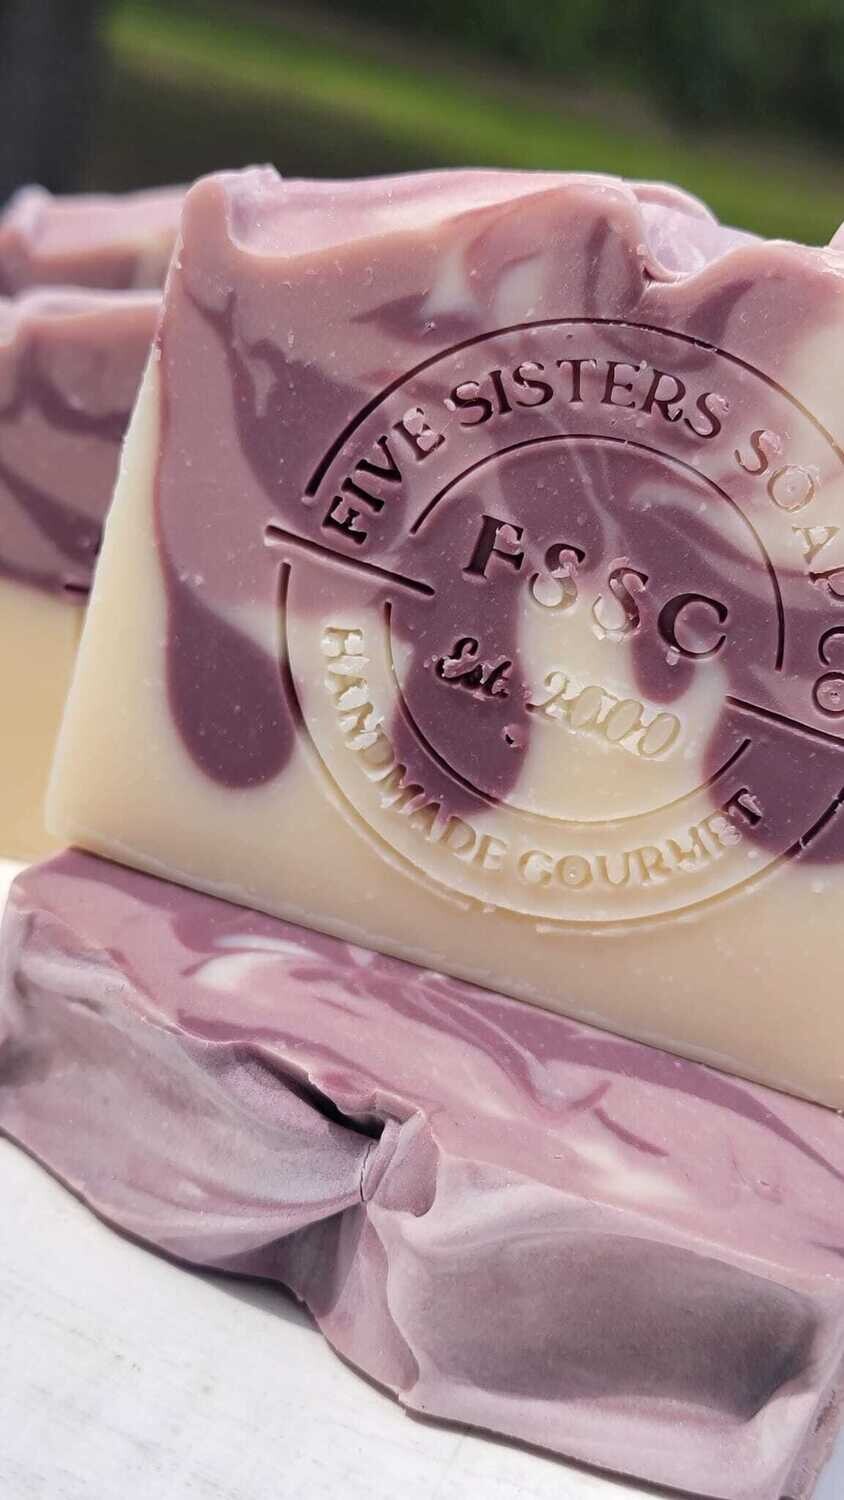 Mediterranean Fig Gourmet Soap Available on 3/15